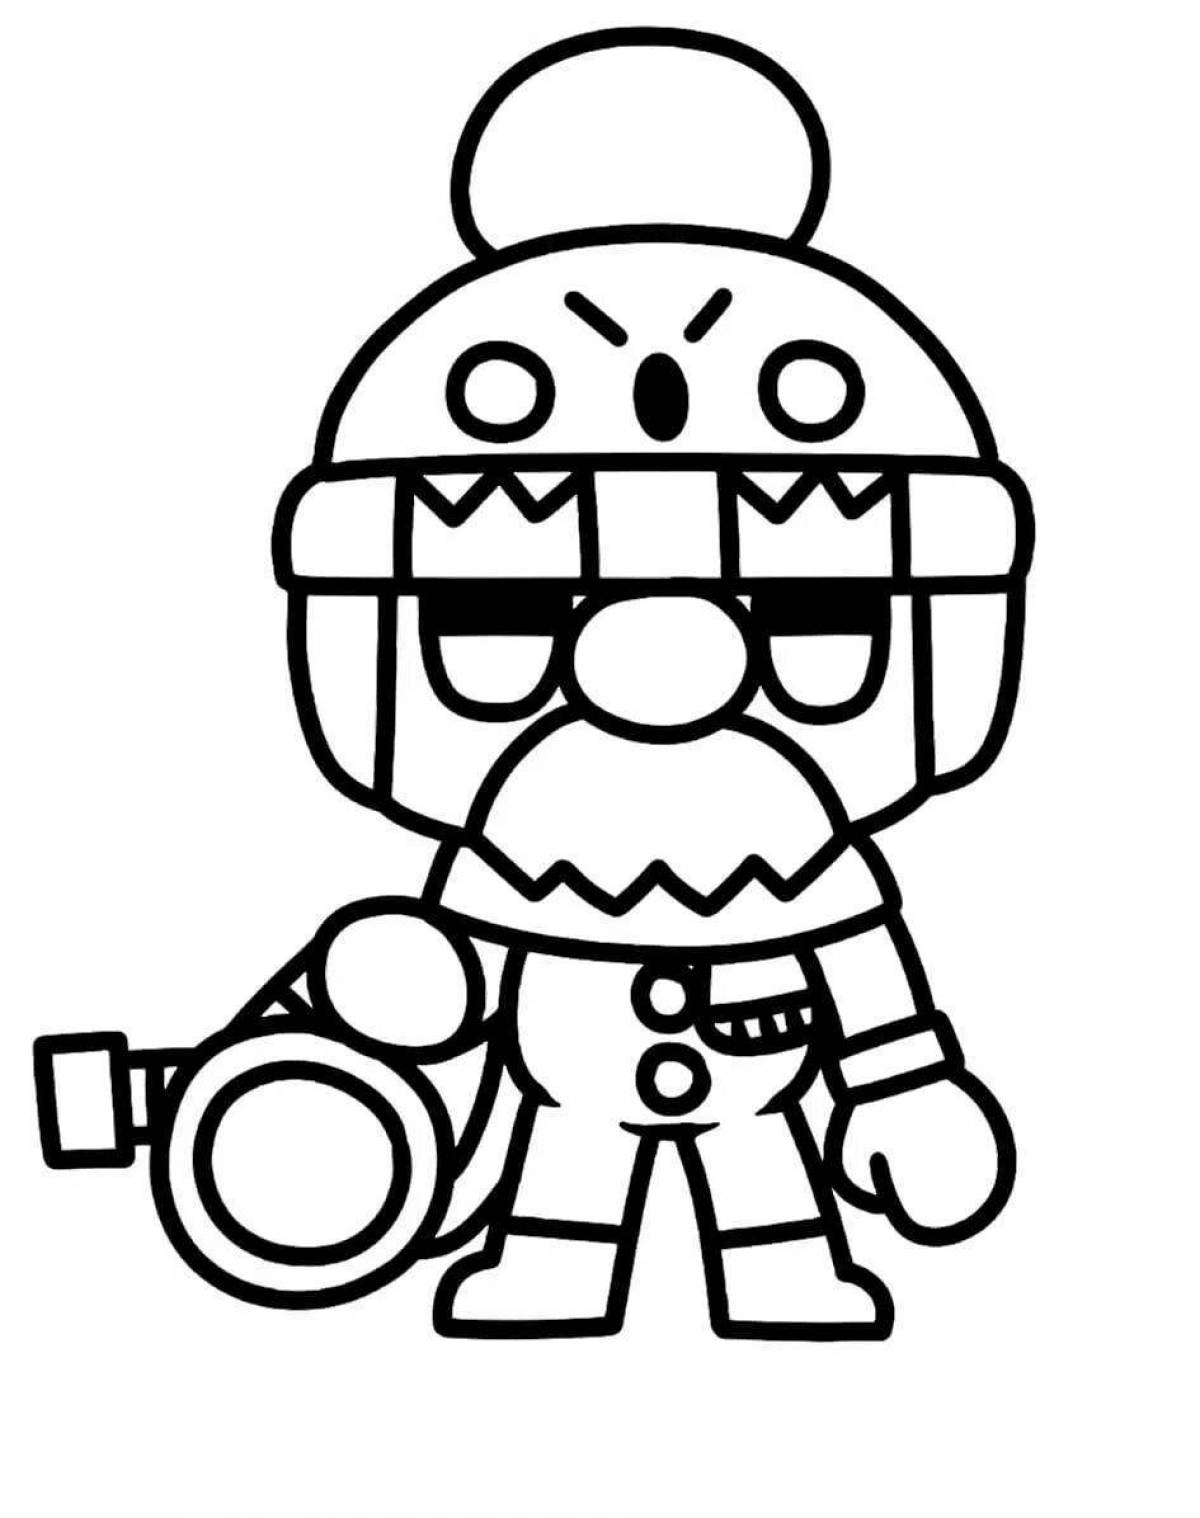 Dazzling brawl stars coloring pages